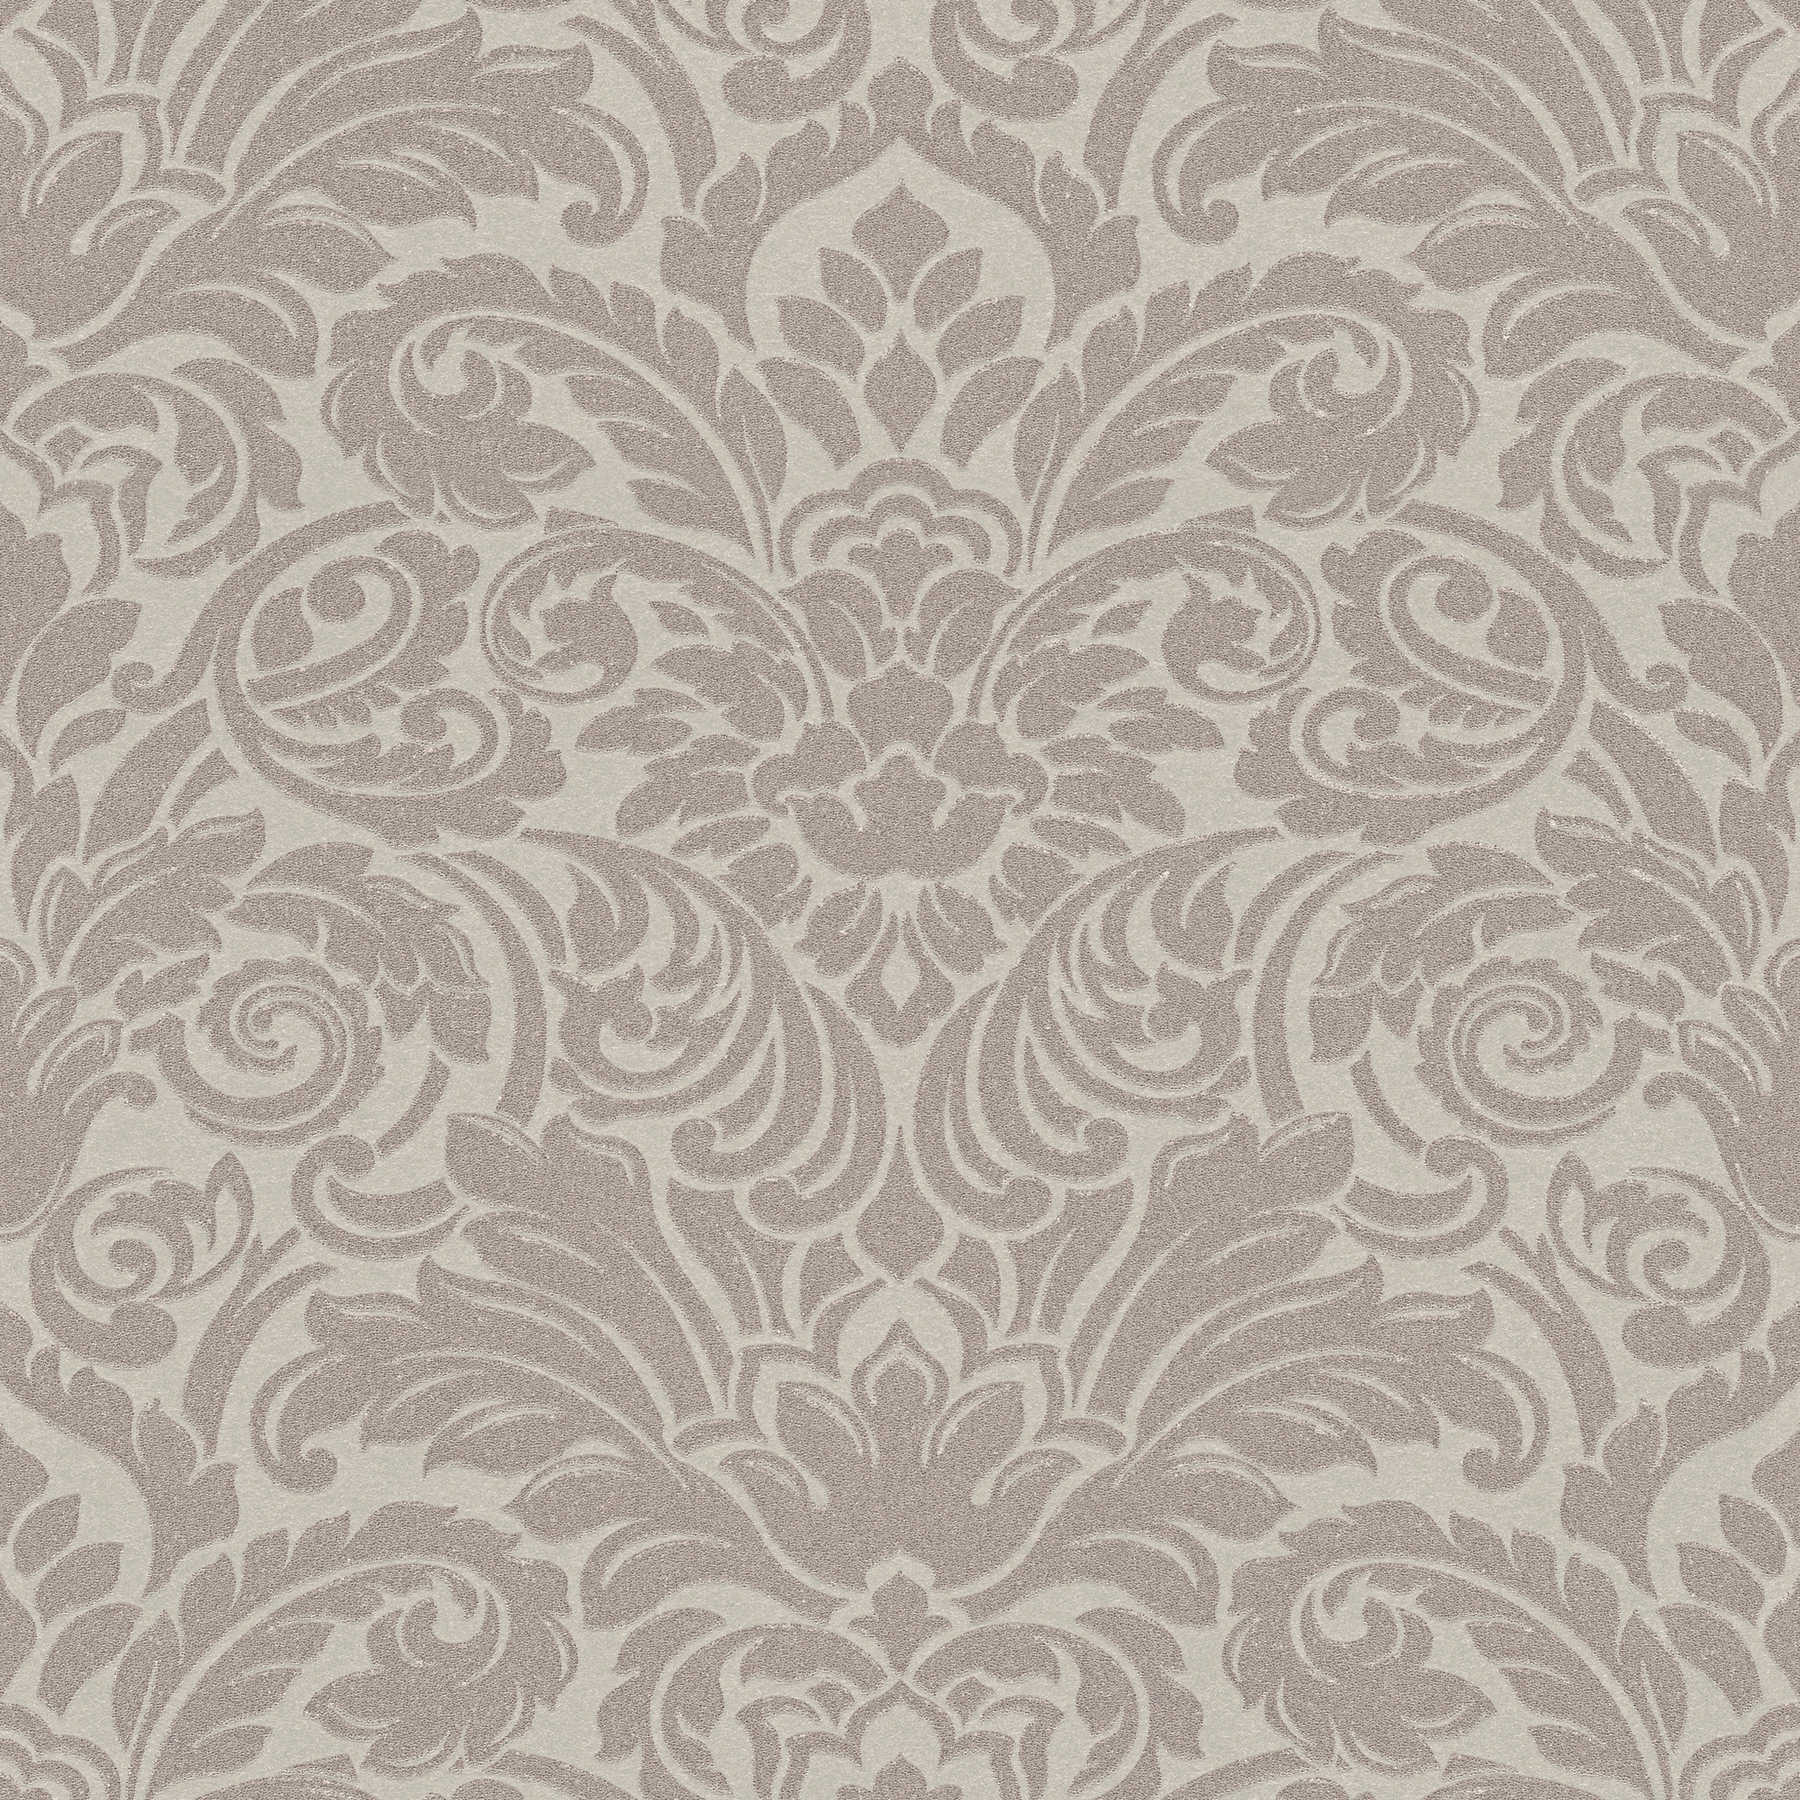 Ornamental wallpaper with metallic effect and floral design - bronze, brown
